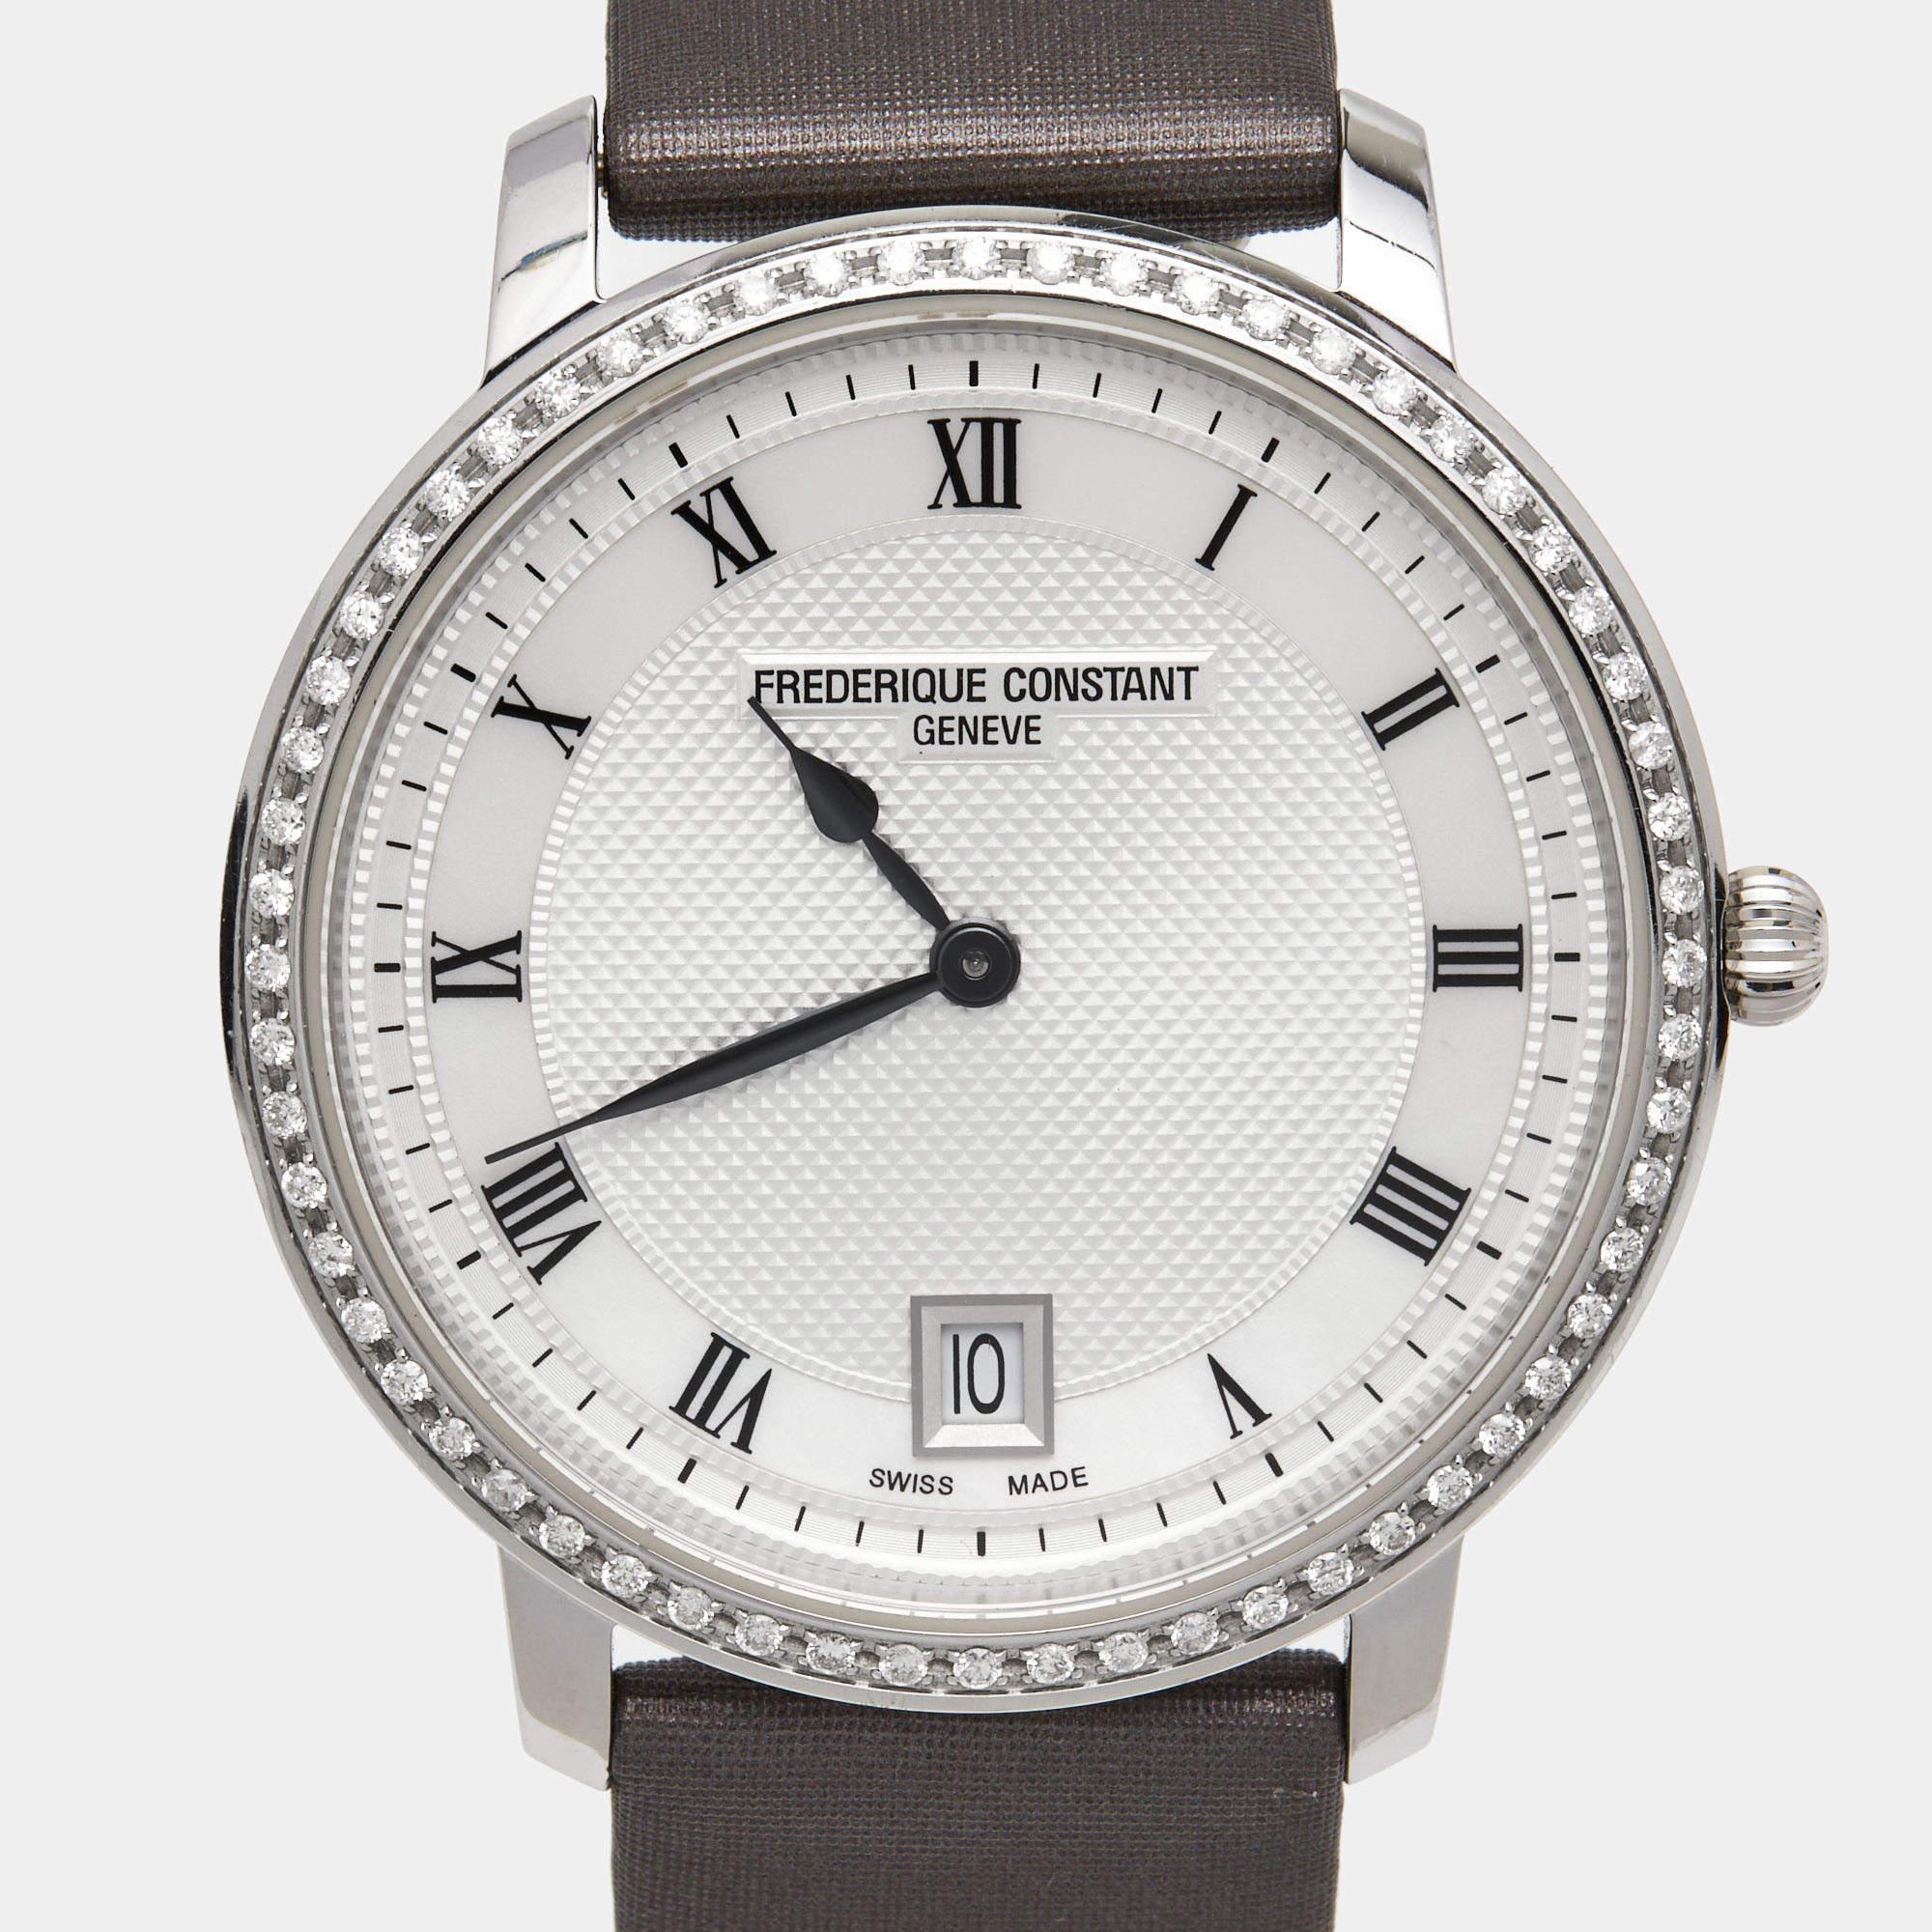 The charm of a finely crafted wristwatch accompanies the wearer through the years and to any occasion they have a date for. It is this charm, infused with timeless luxury, that makes this authentic Frederique Constant wristwatch such an incredible